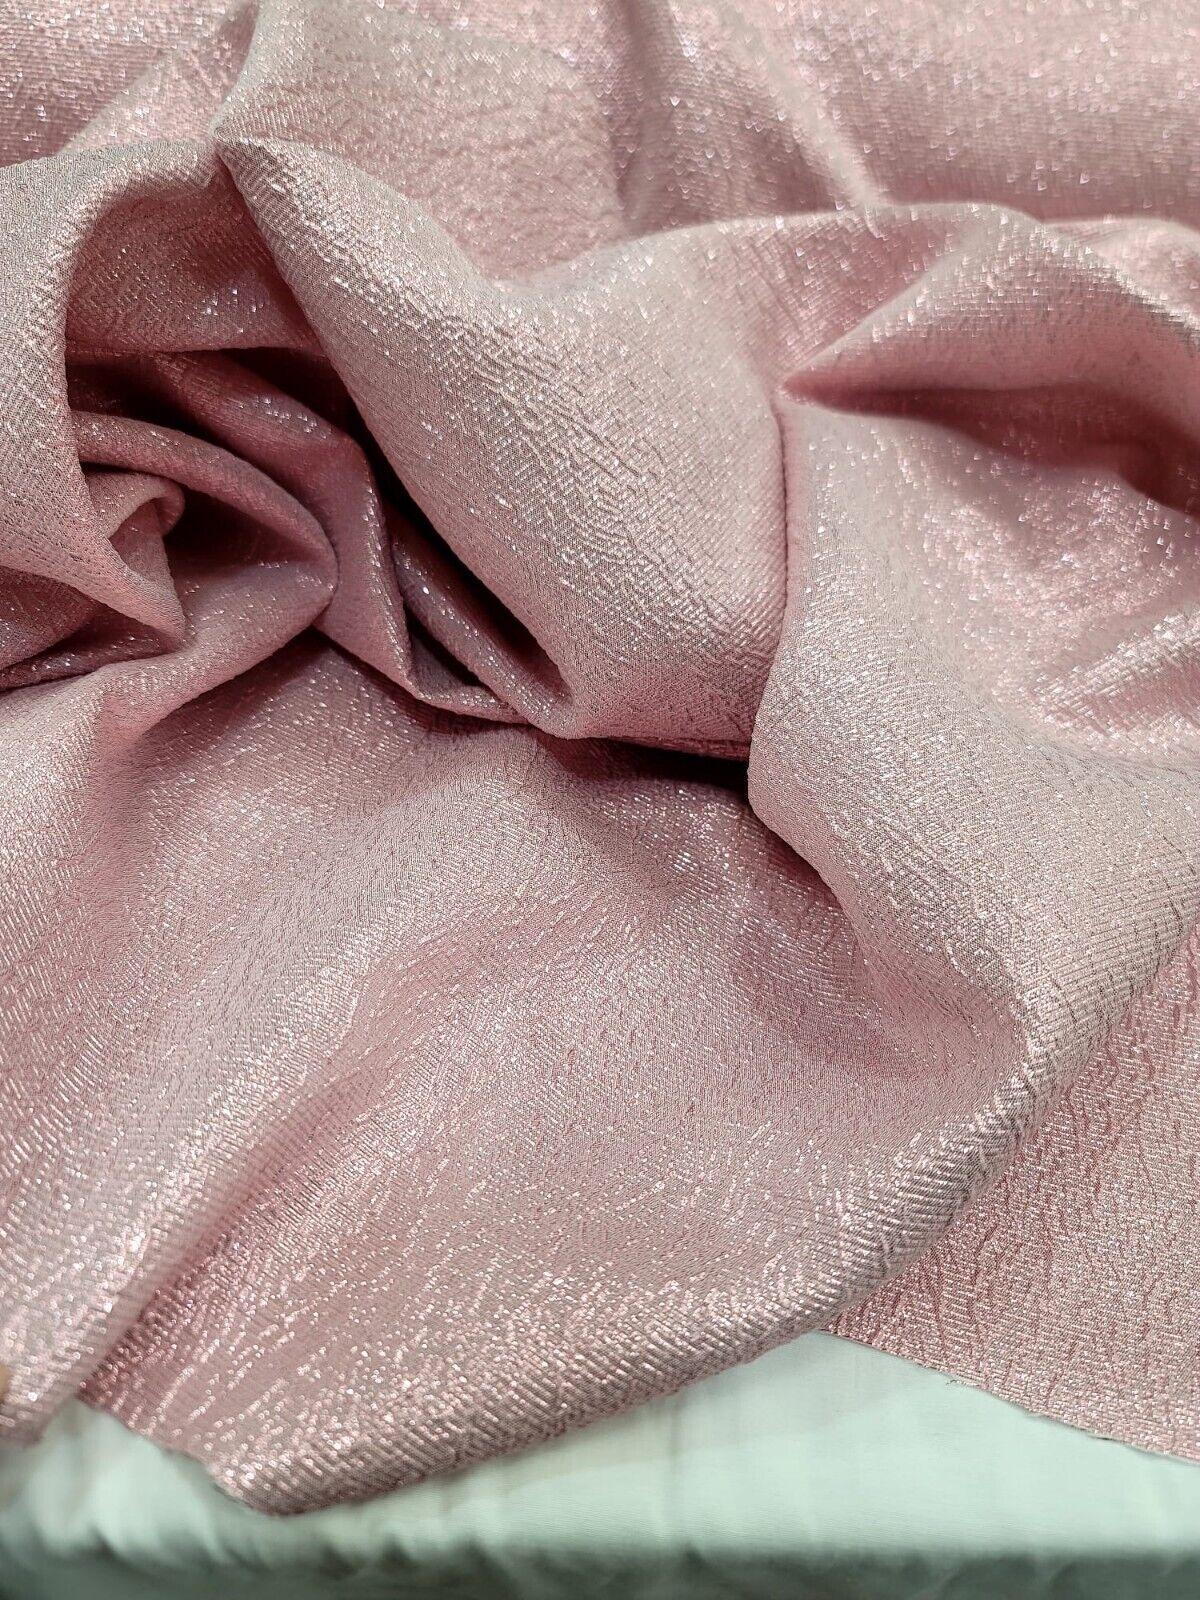 Pink Brocade Fabric Sold By The Yard Textured Iridescent Fabric For Dress